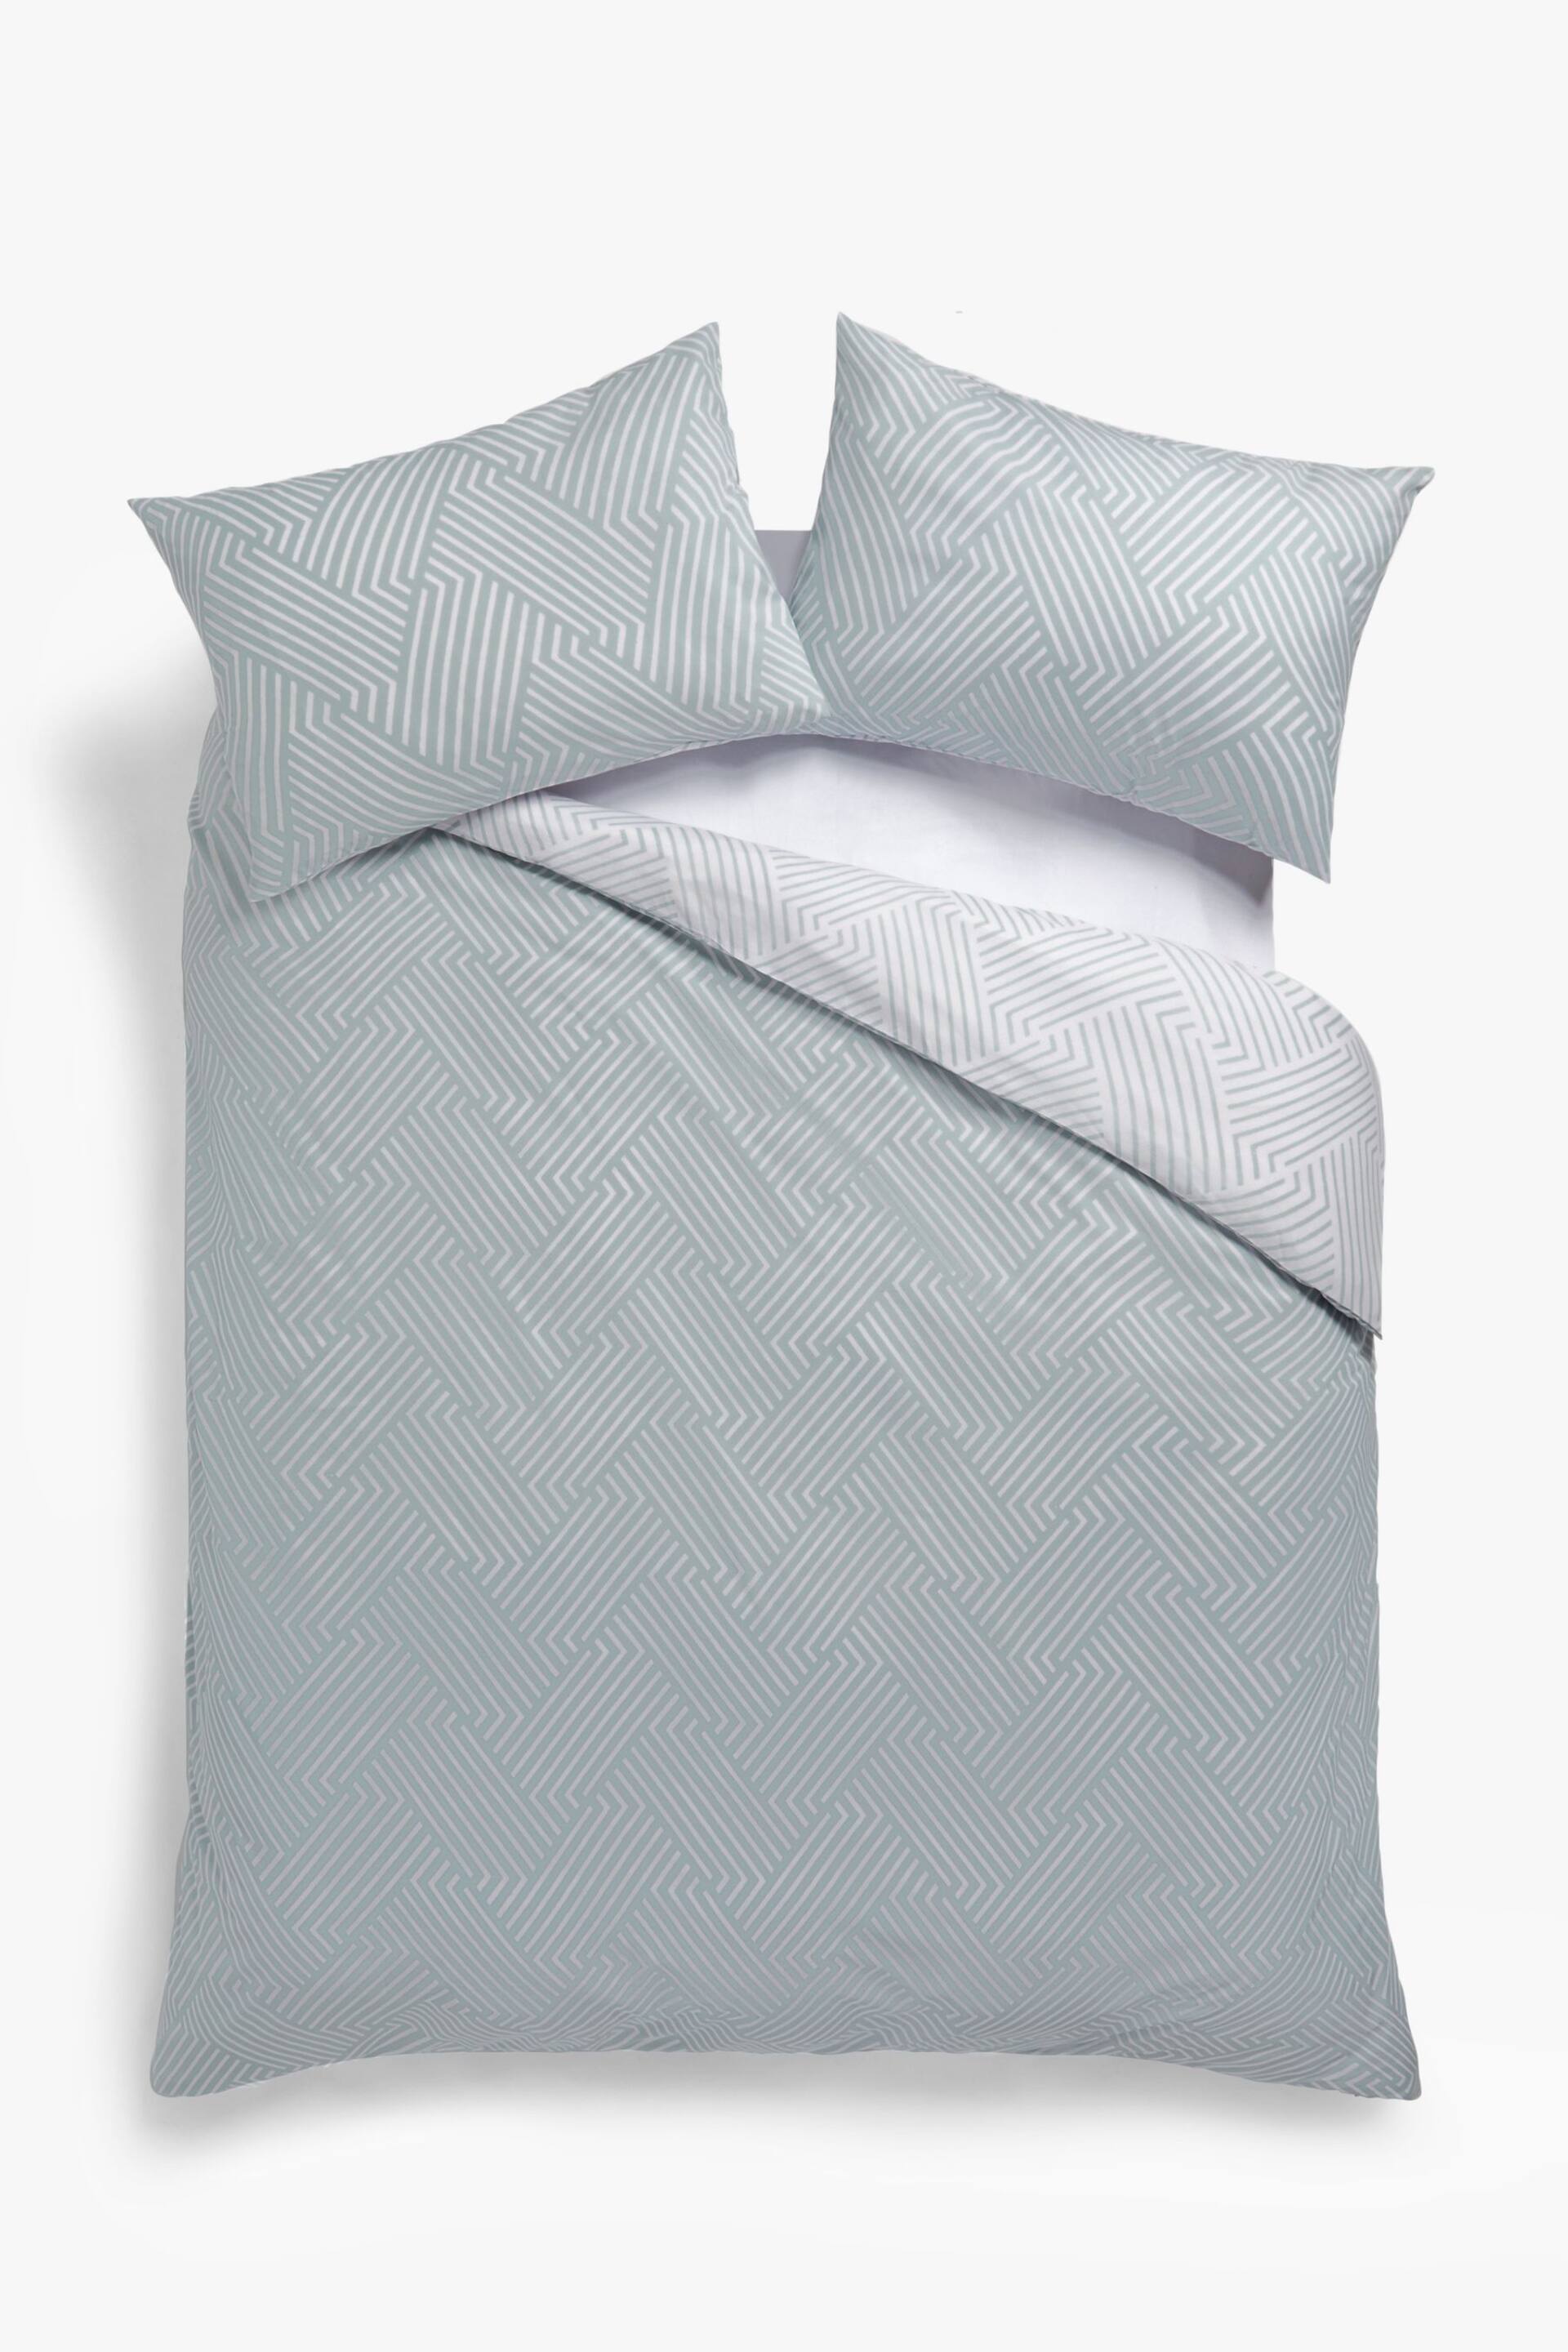 Sage Green Geometric Duvet Cover and Pillowcase Set - Image 5 of 6